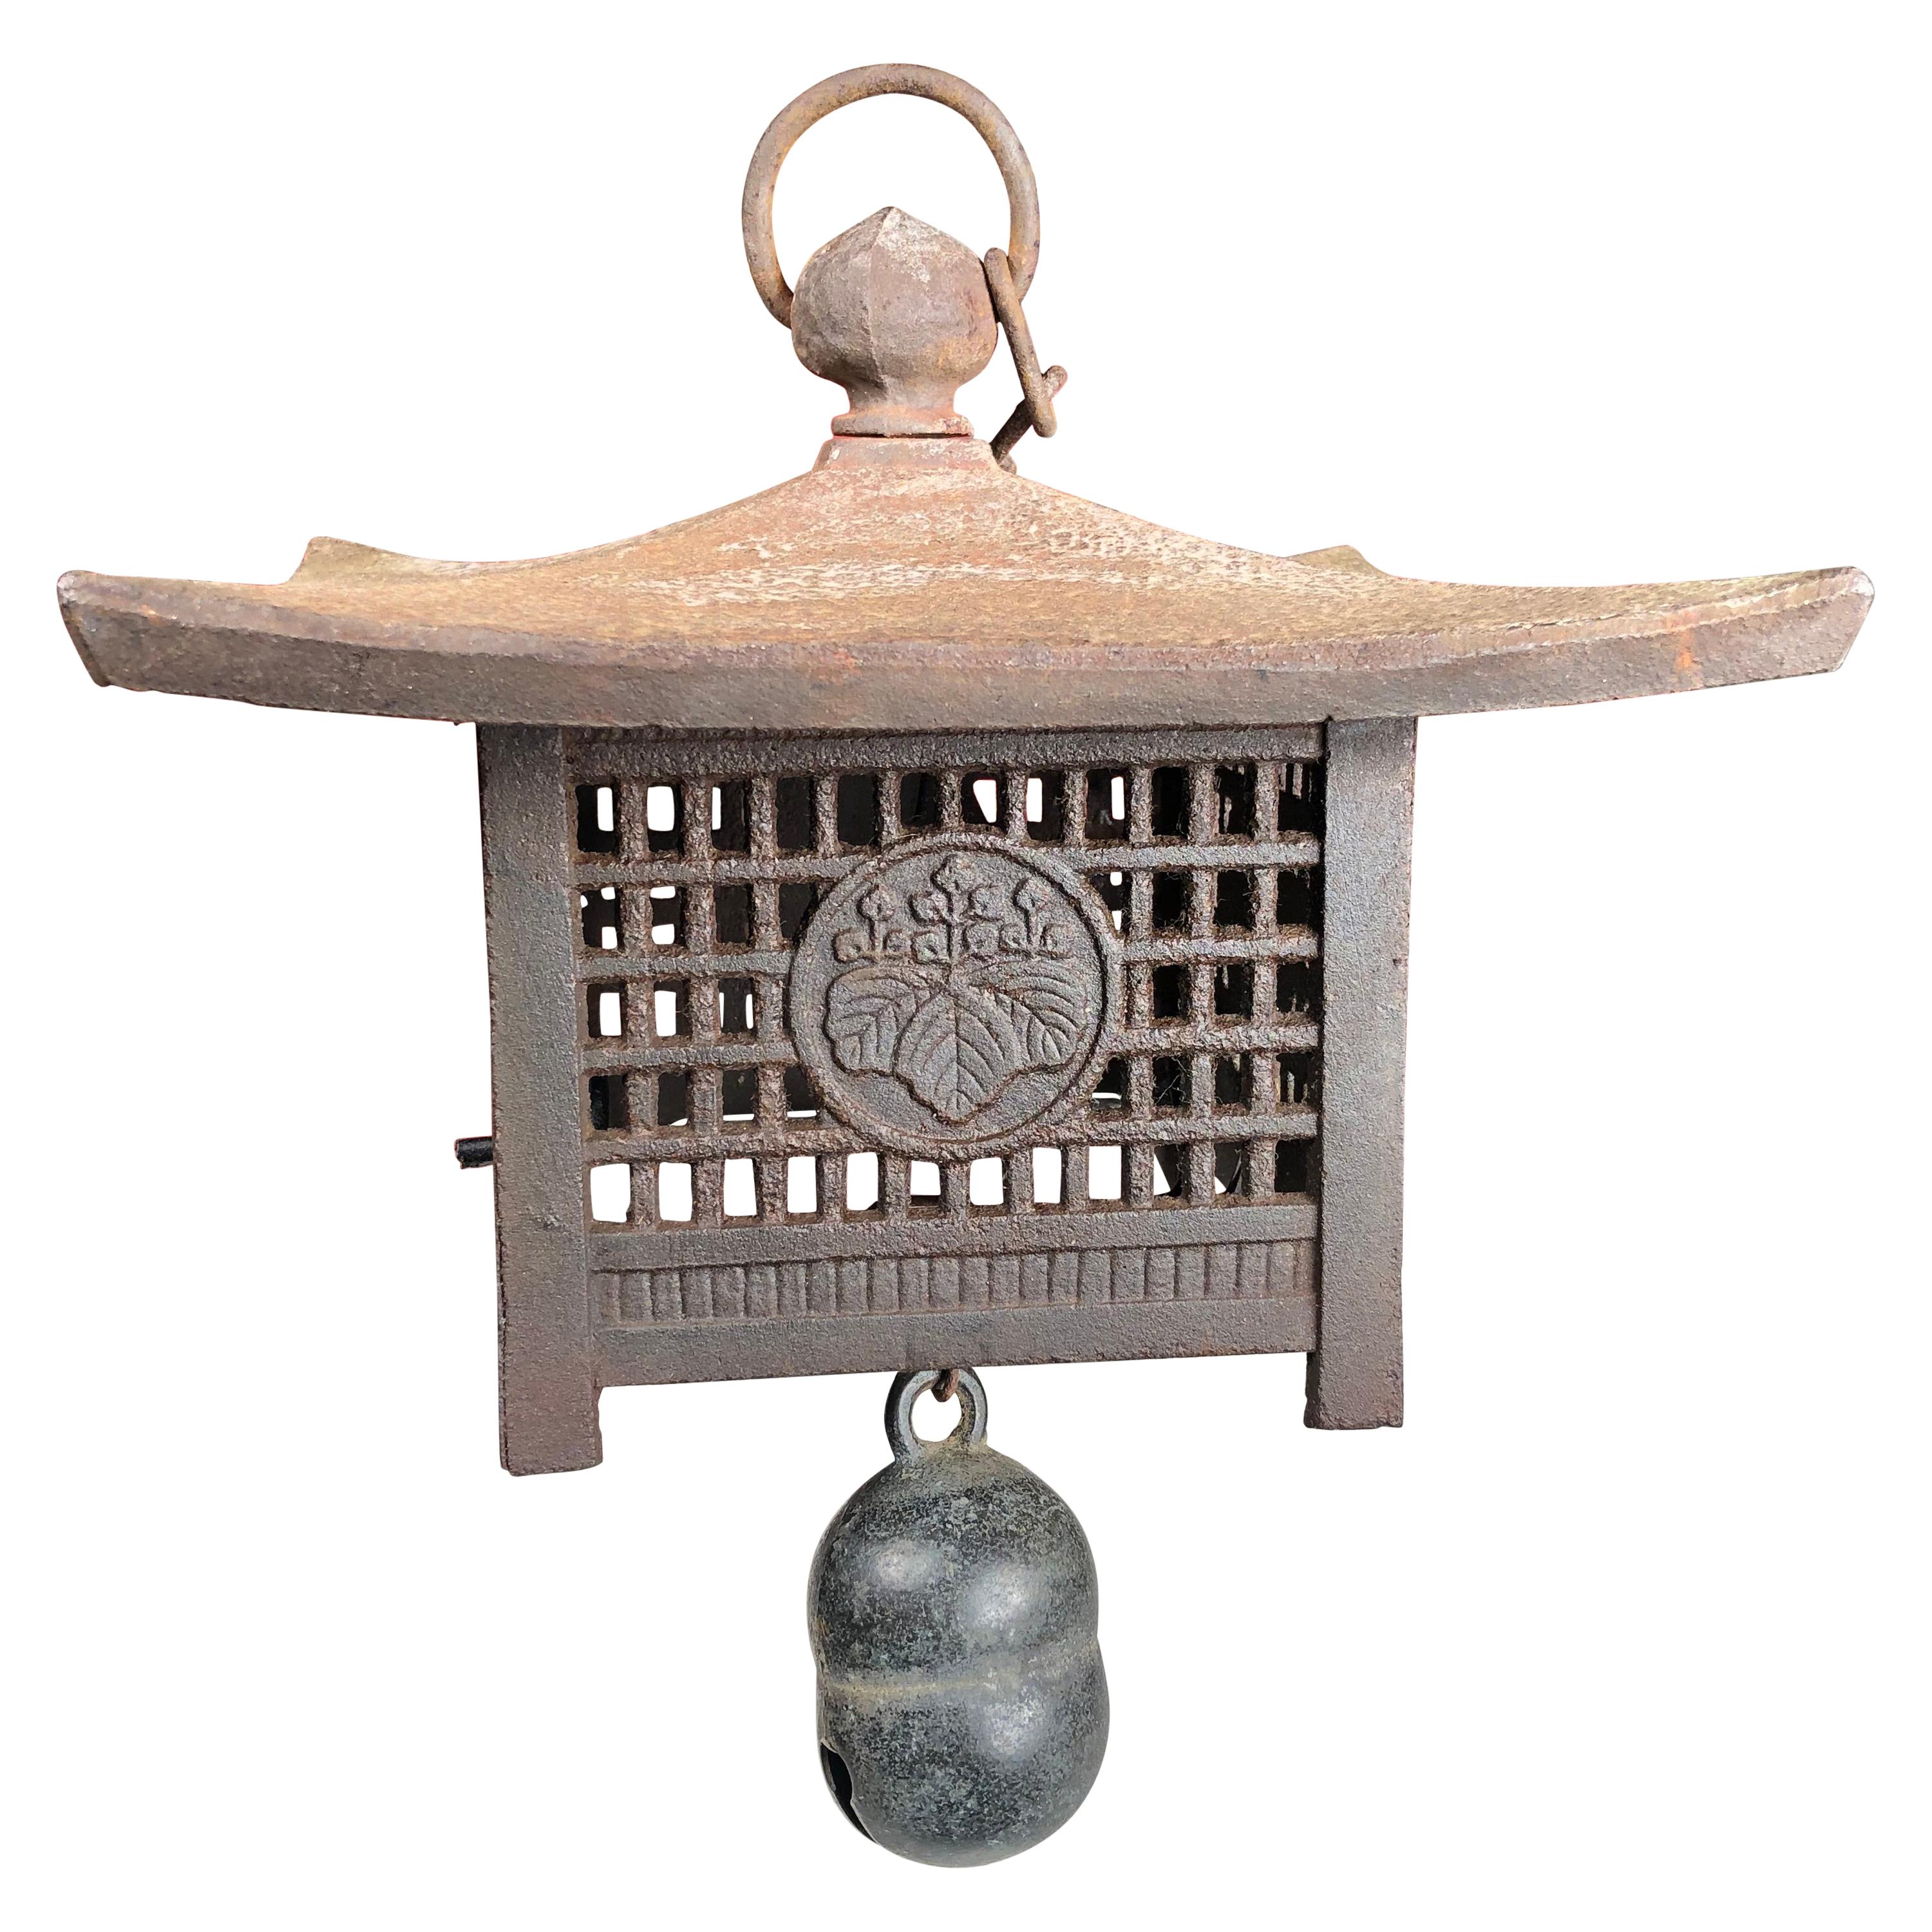 Japanese Large Old Lantern & Wind Chime with Beautiful Ringing Bell